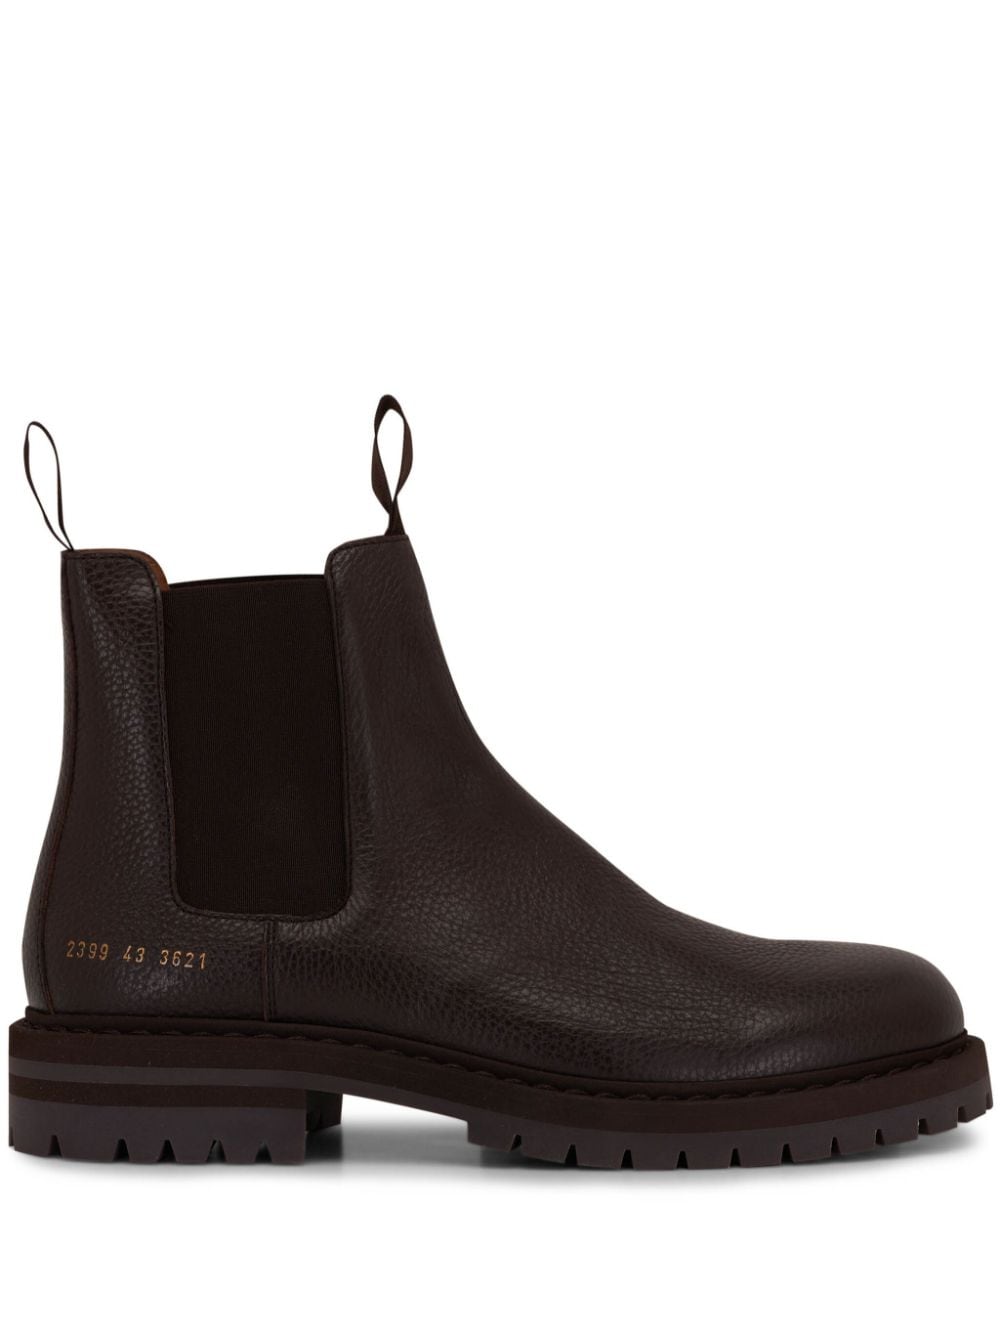 Common Projects ankle leather boots - Brown von Common Projects